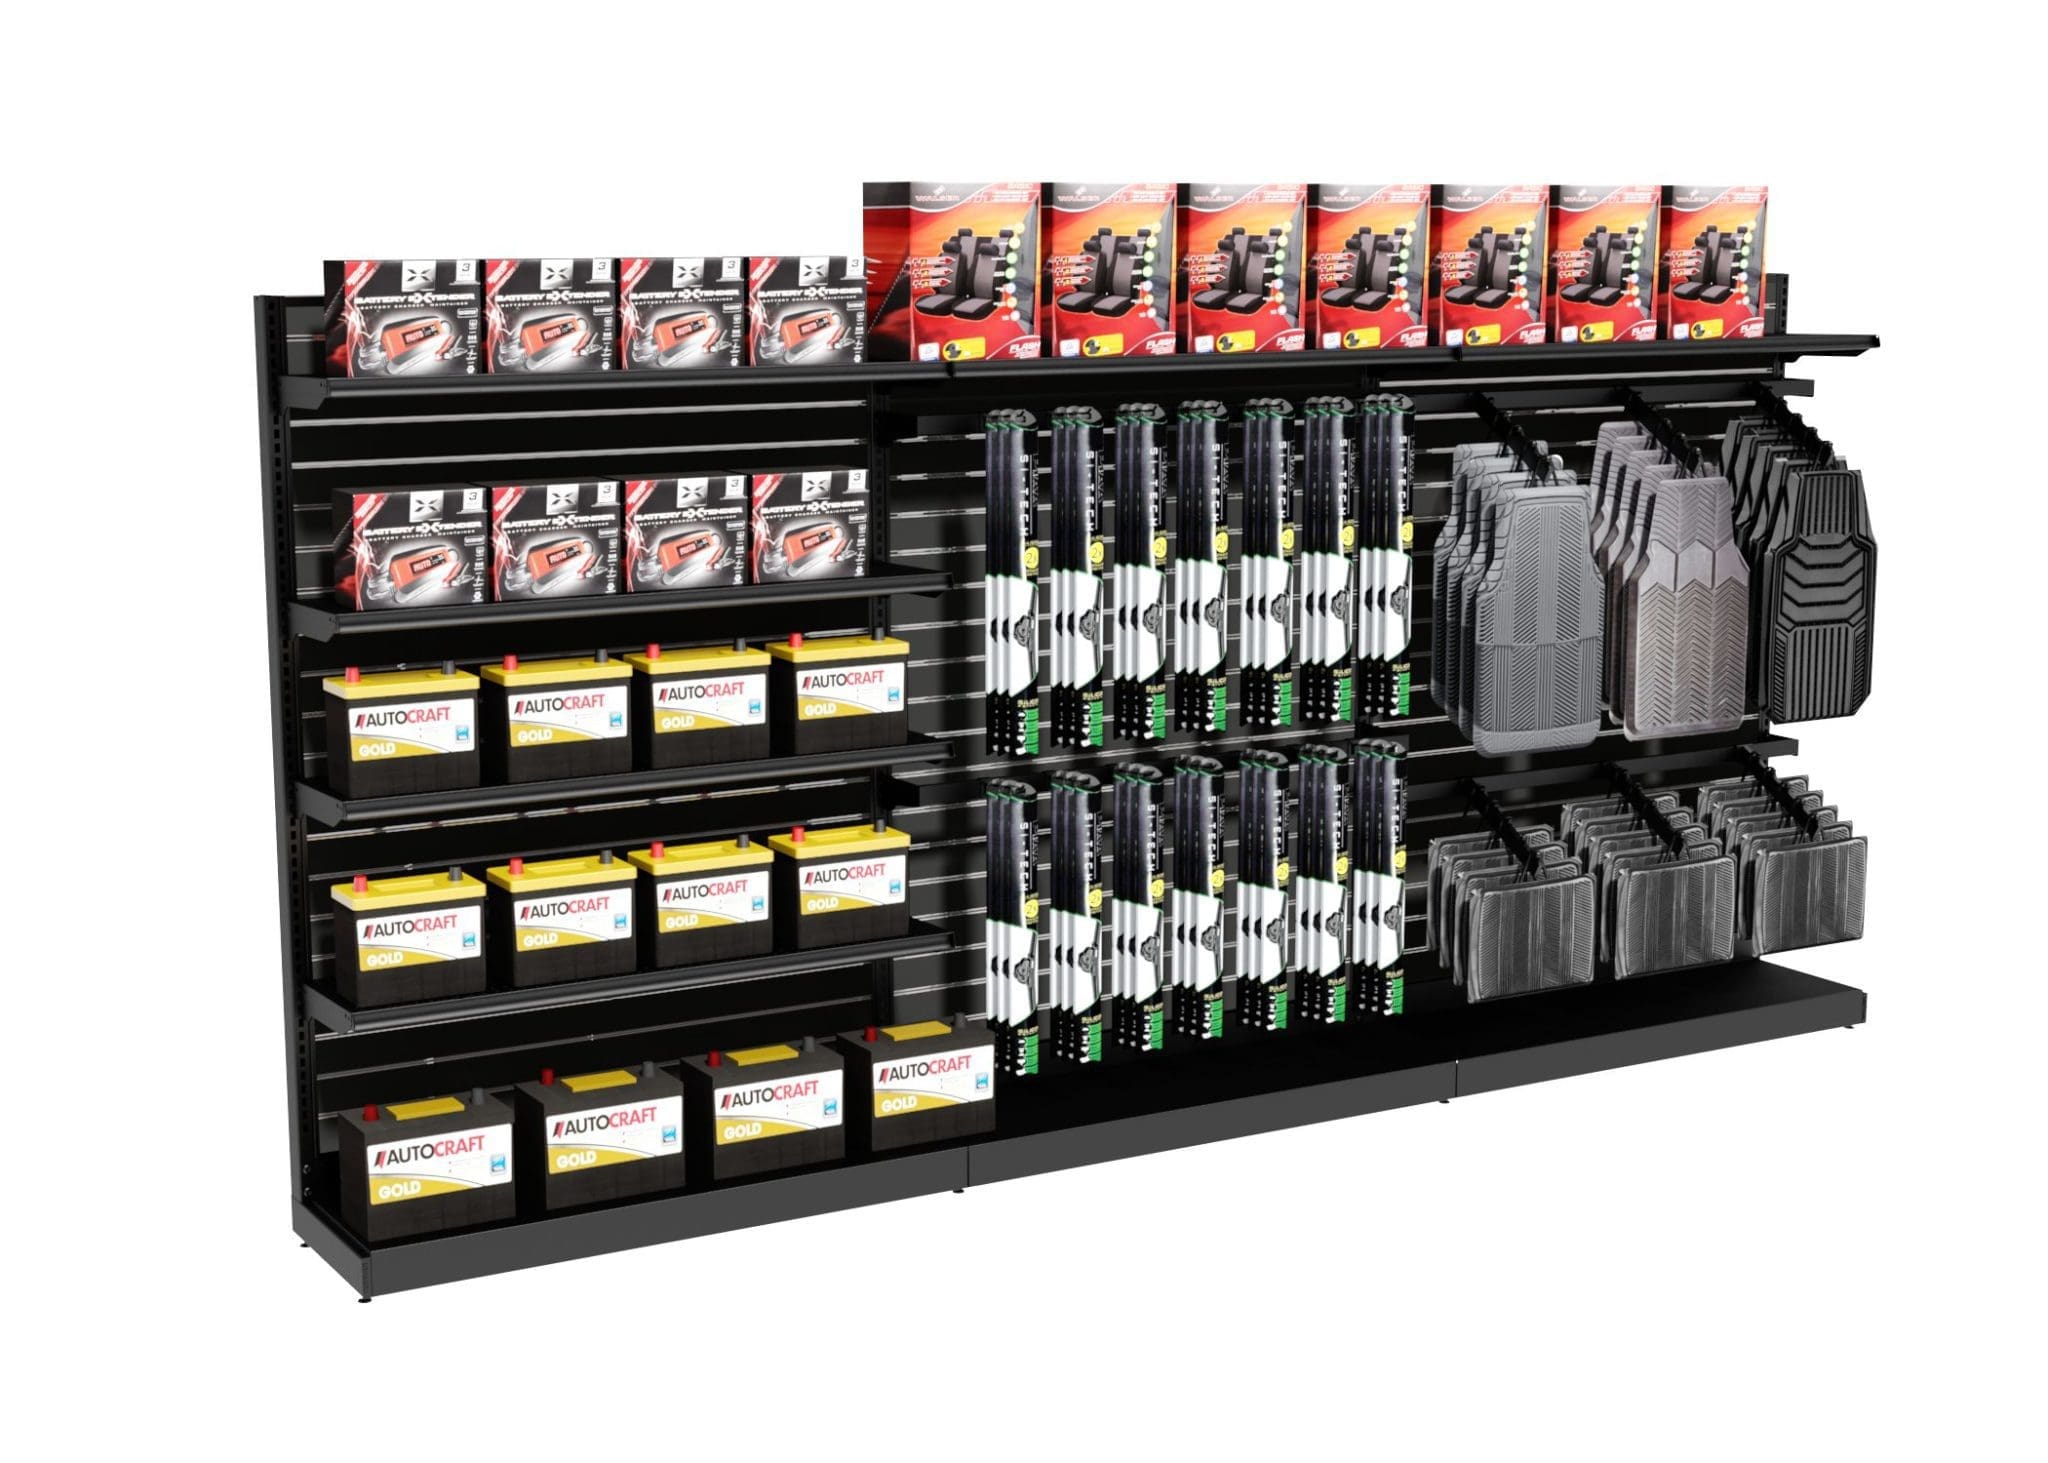 L Series – Shelving systemcomponents